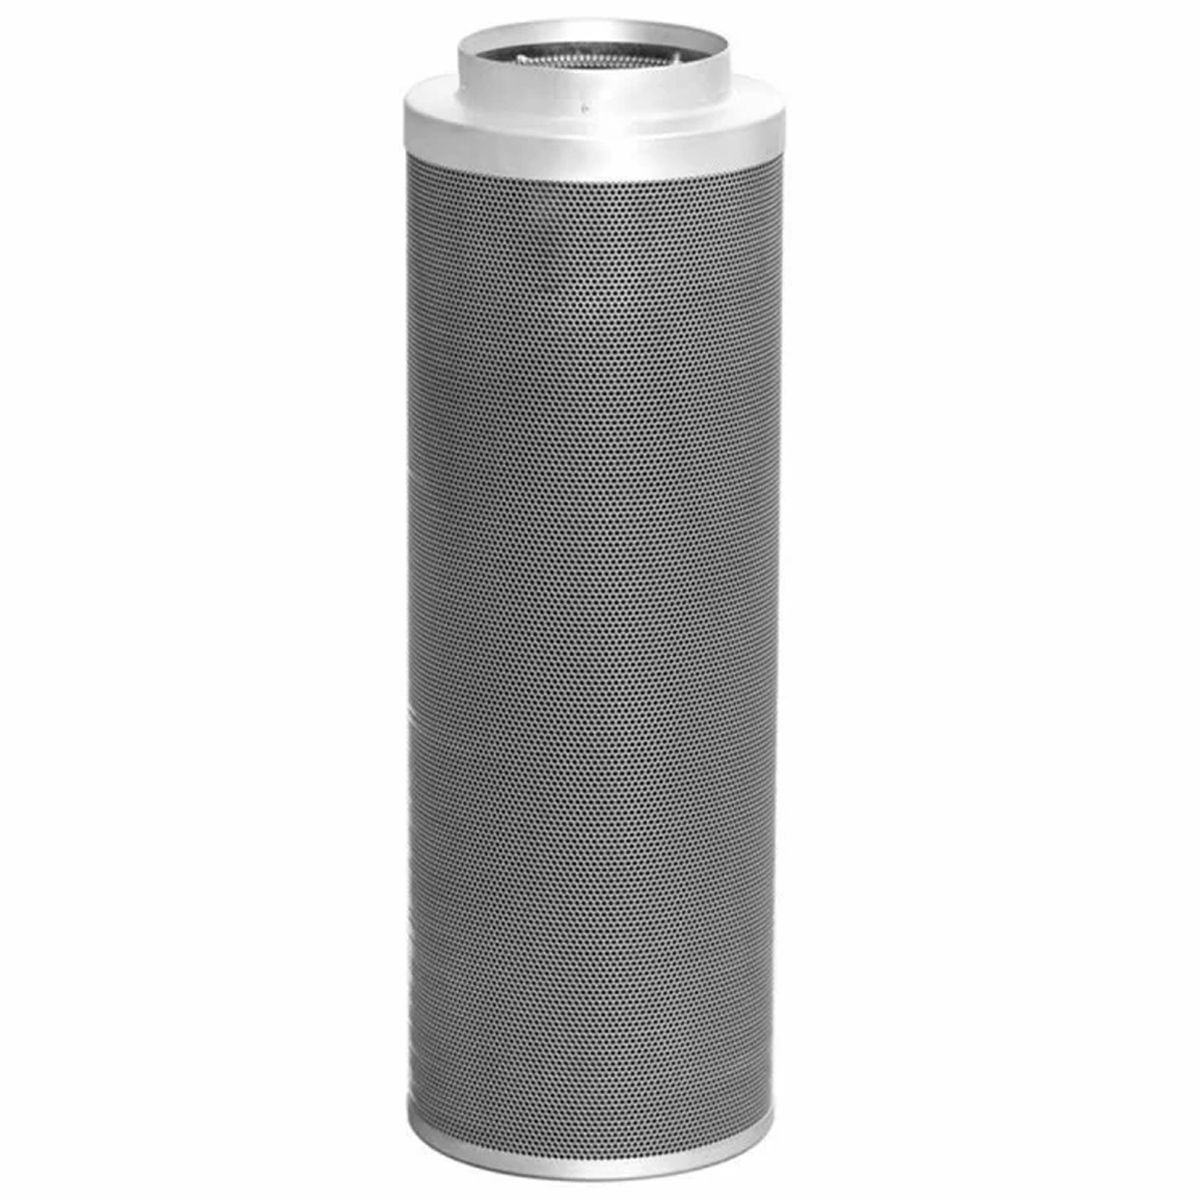 Activated carbon filter Rhino Pro